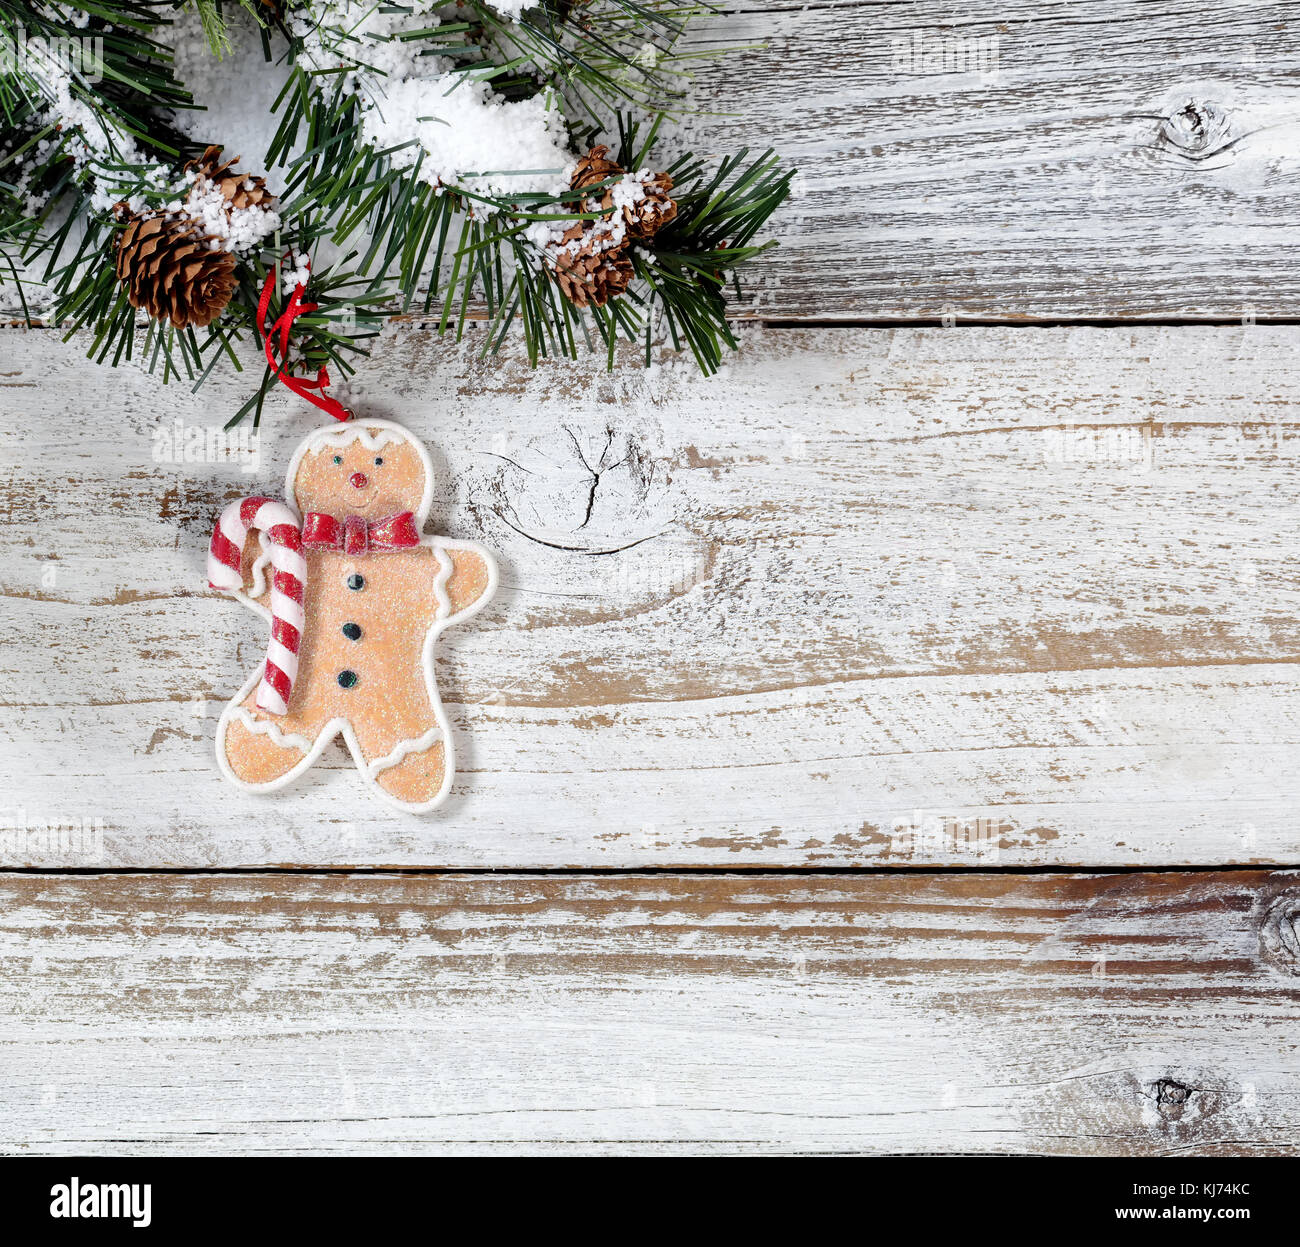 Christmas cookie ornament hanging in rough fir tree branch on rustic white wooden background Stock Photo